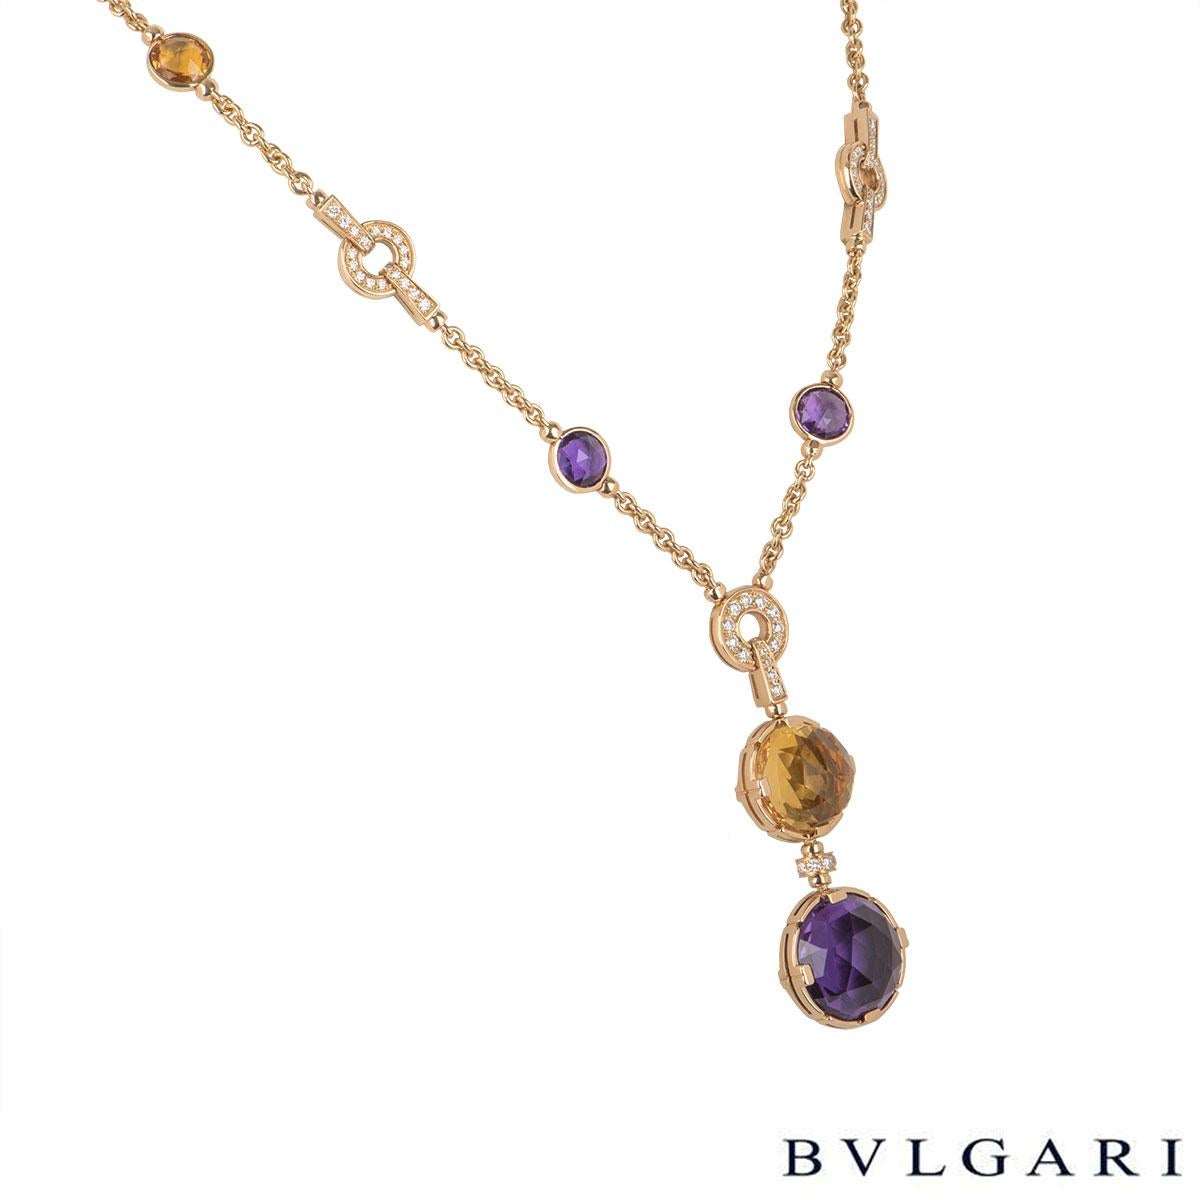 A stunning 18k rose gold diamond and multi-gem necklace by Bvlgari from the Parentesi collection. The necklace comprises of 5 round cut amethyst stones, 2 citrine stones and 5 diamond set Parentesi motifs. The necklace has approximately 120 diamonds